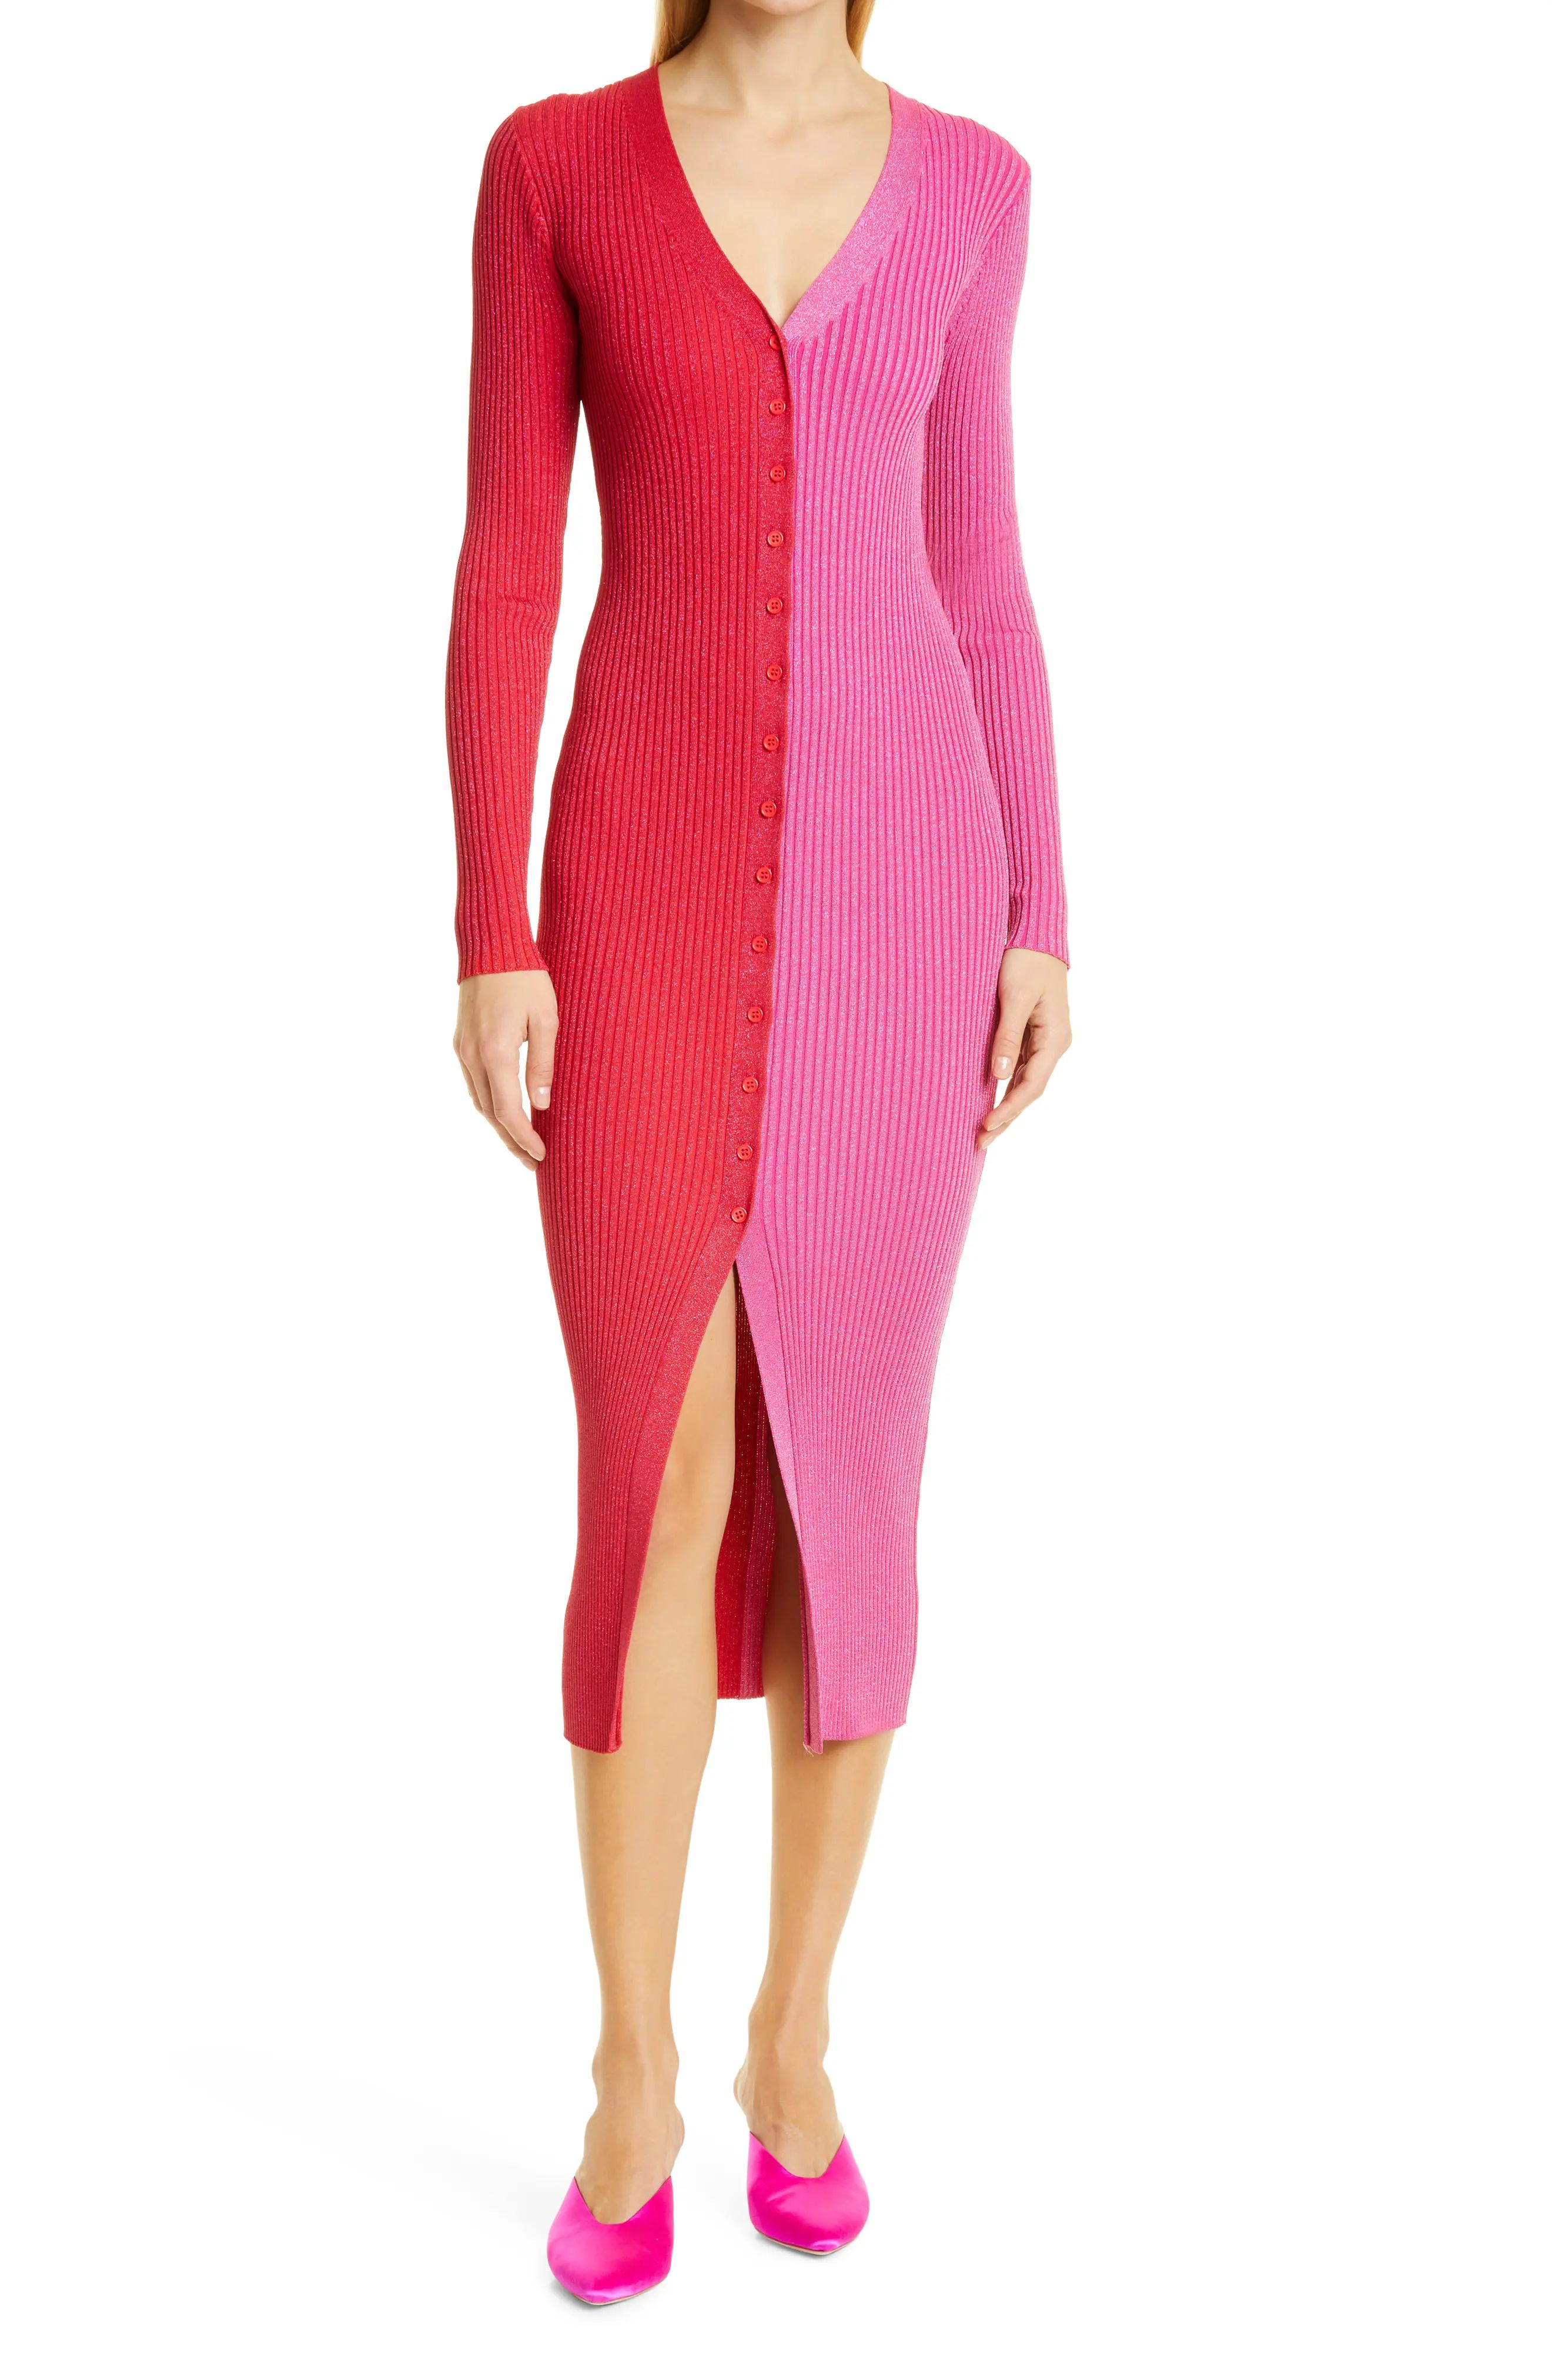 STAUD Shoko Long Sleeve Color Block Sweater Dress in Lava/Peony at Nordstrom, Size X-Small | Nordstrom